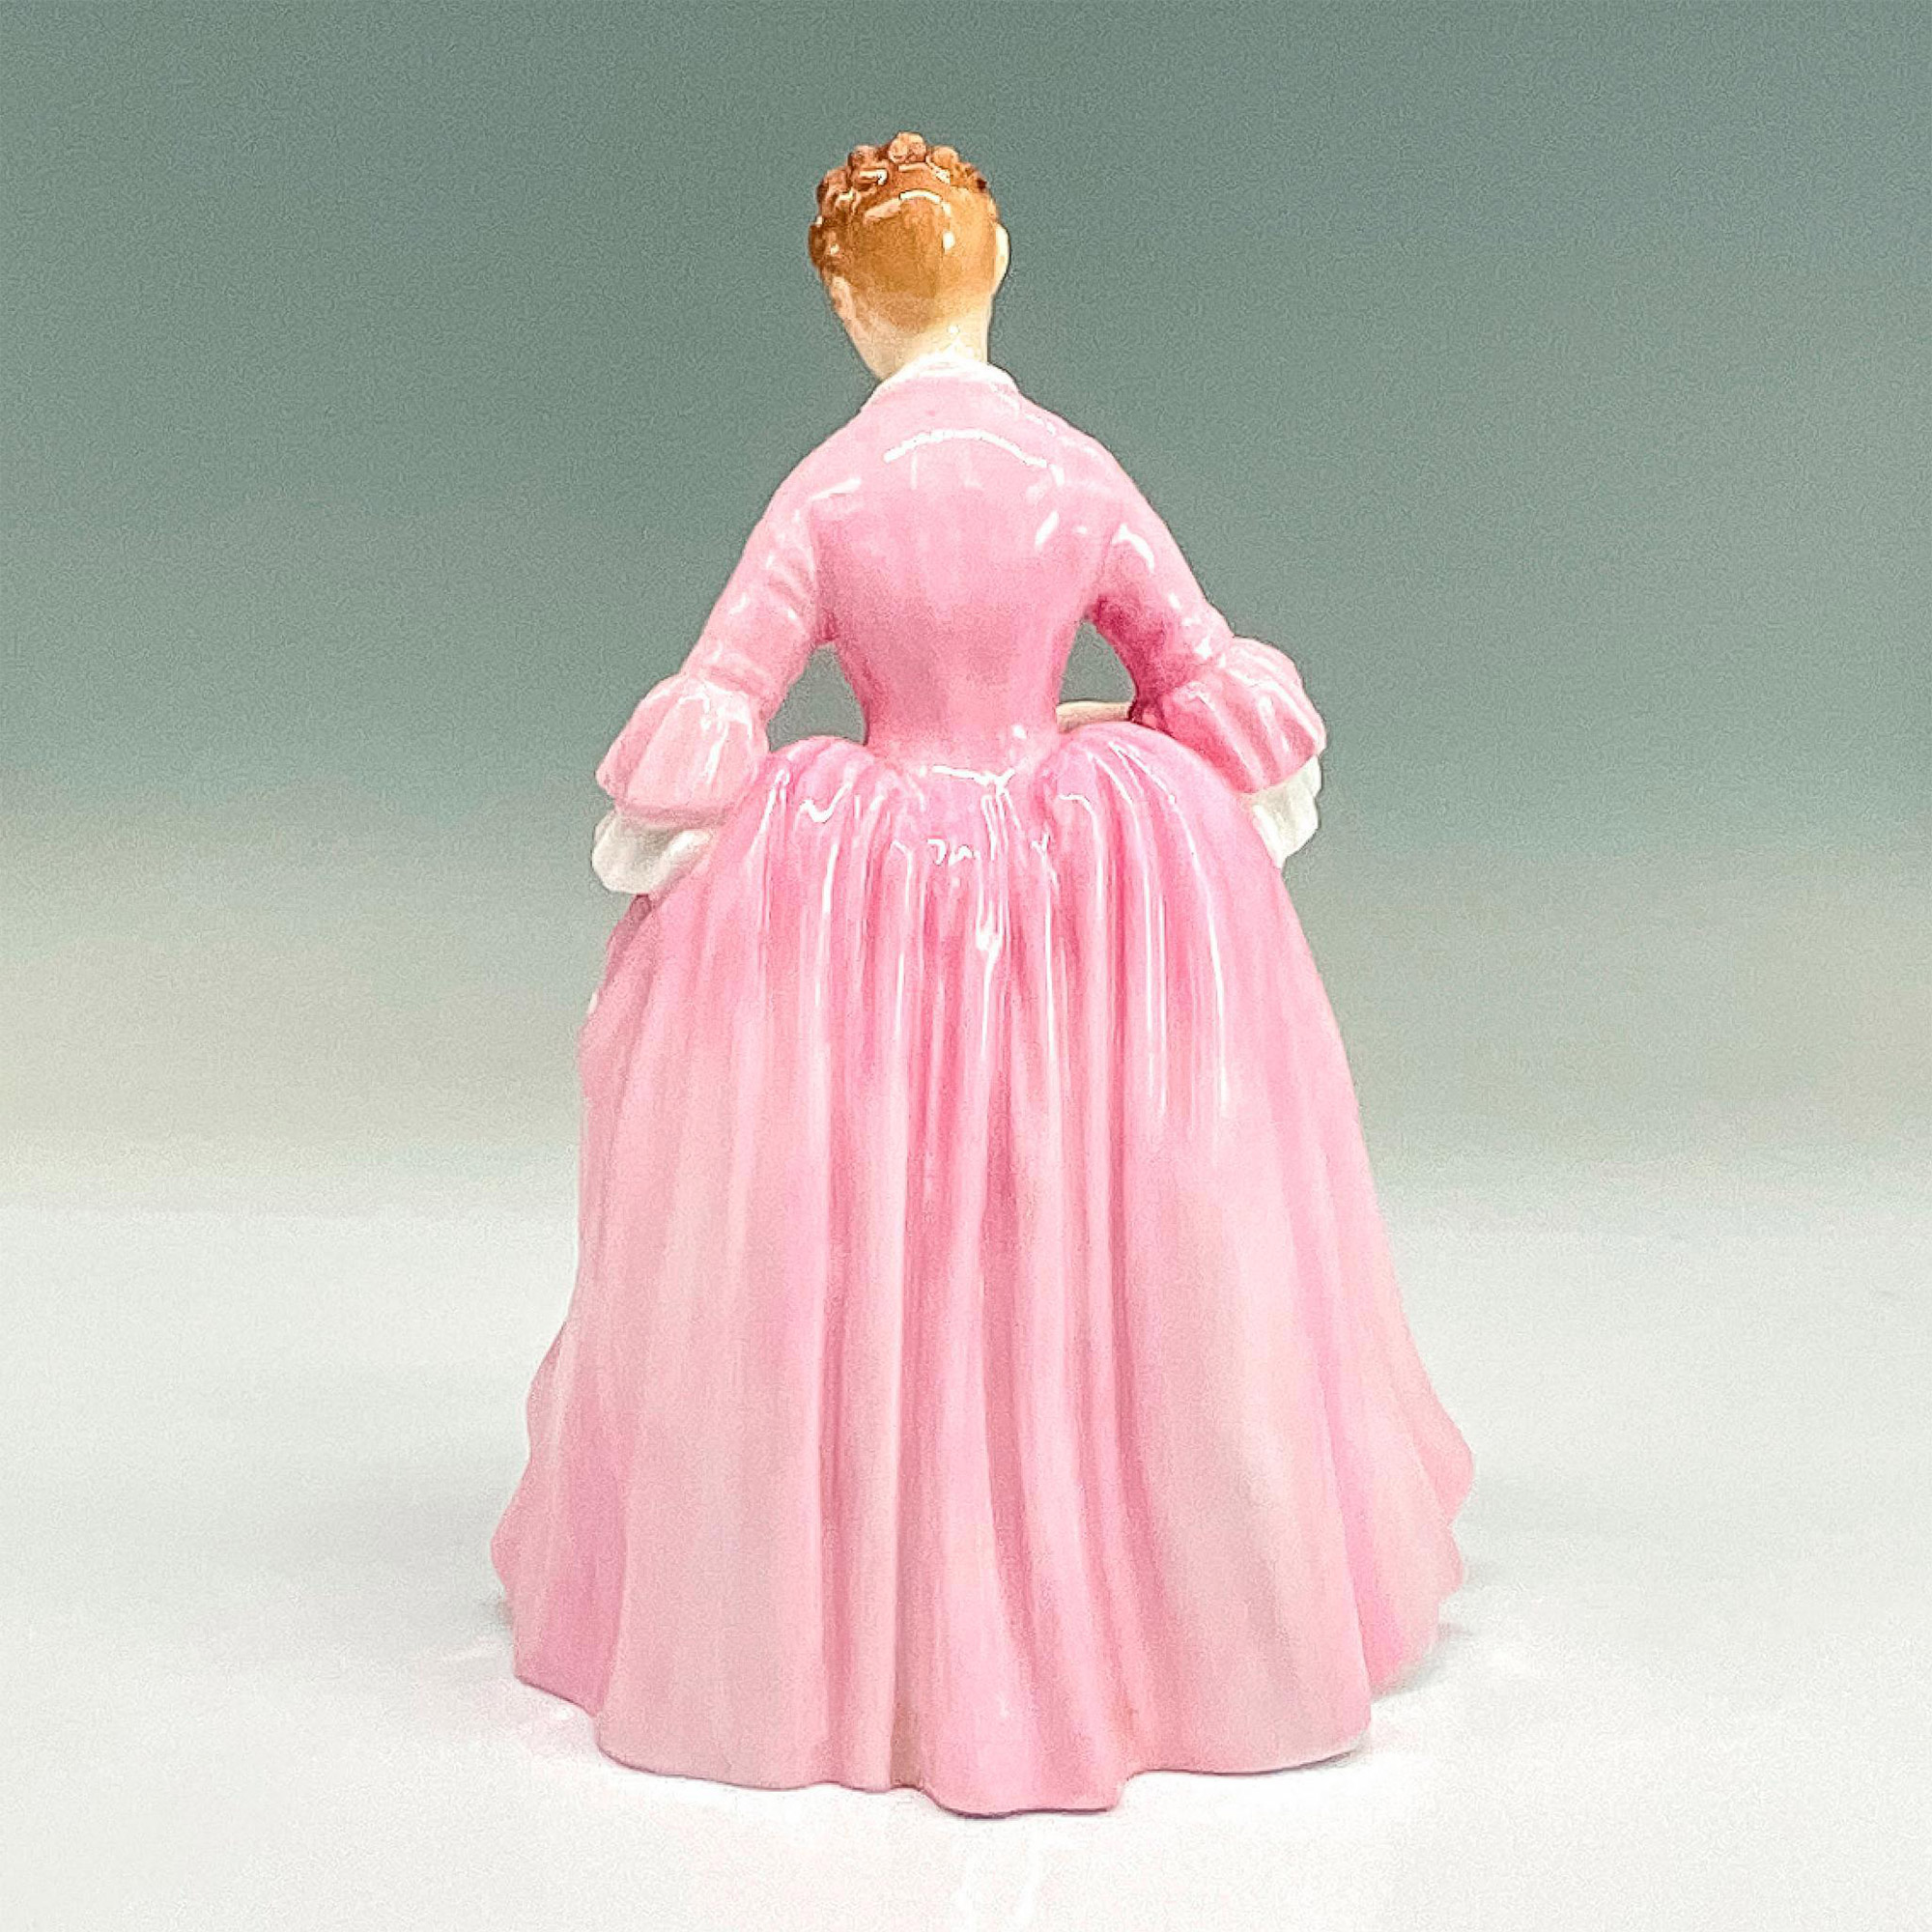 Hostess from Williamsburg - HN2209 - Royal Doulton Figurine - Image 2 of 3